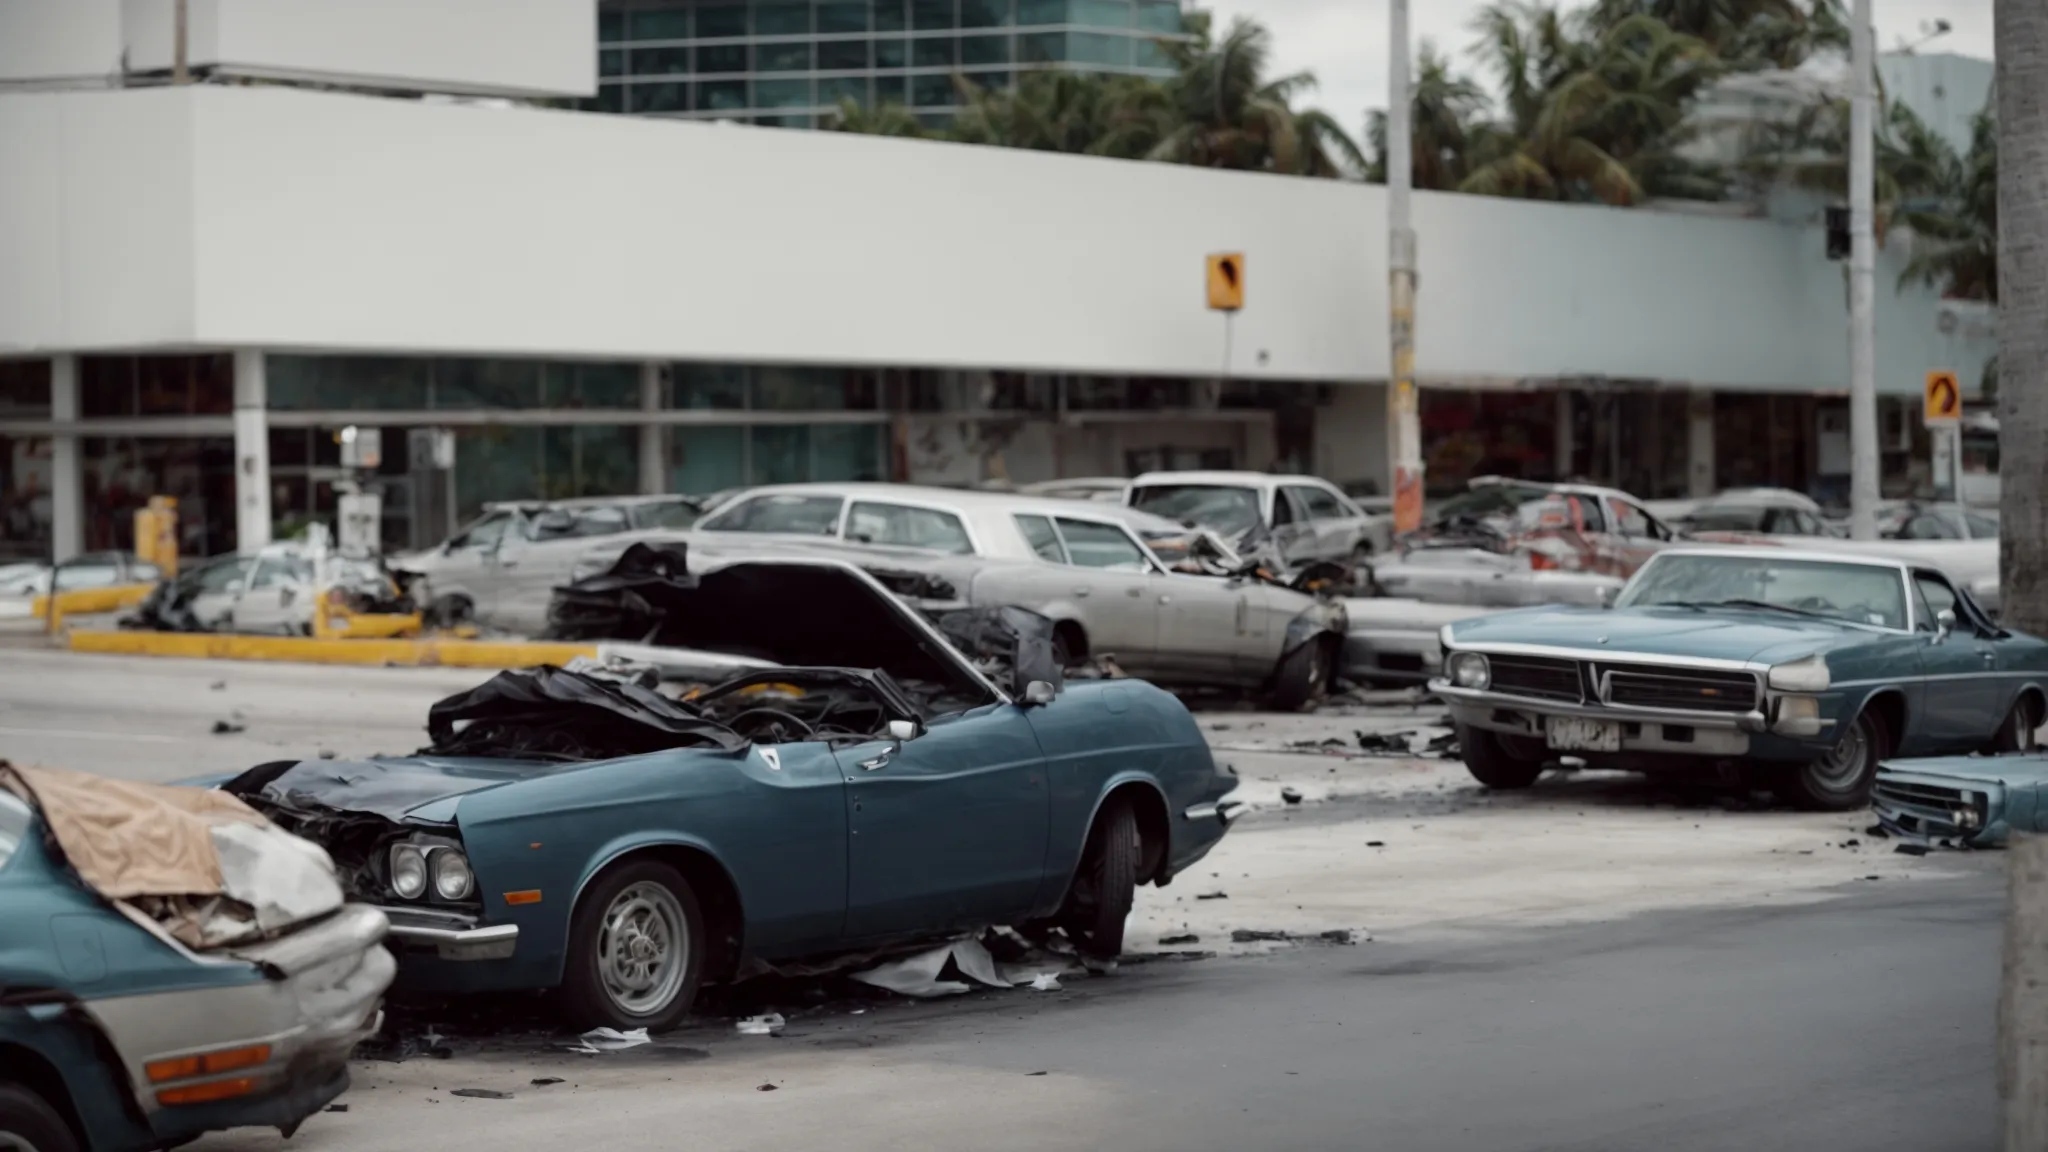 a car accident at a busy miami intersection with no visible logos or identifiers.